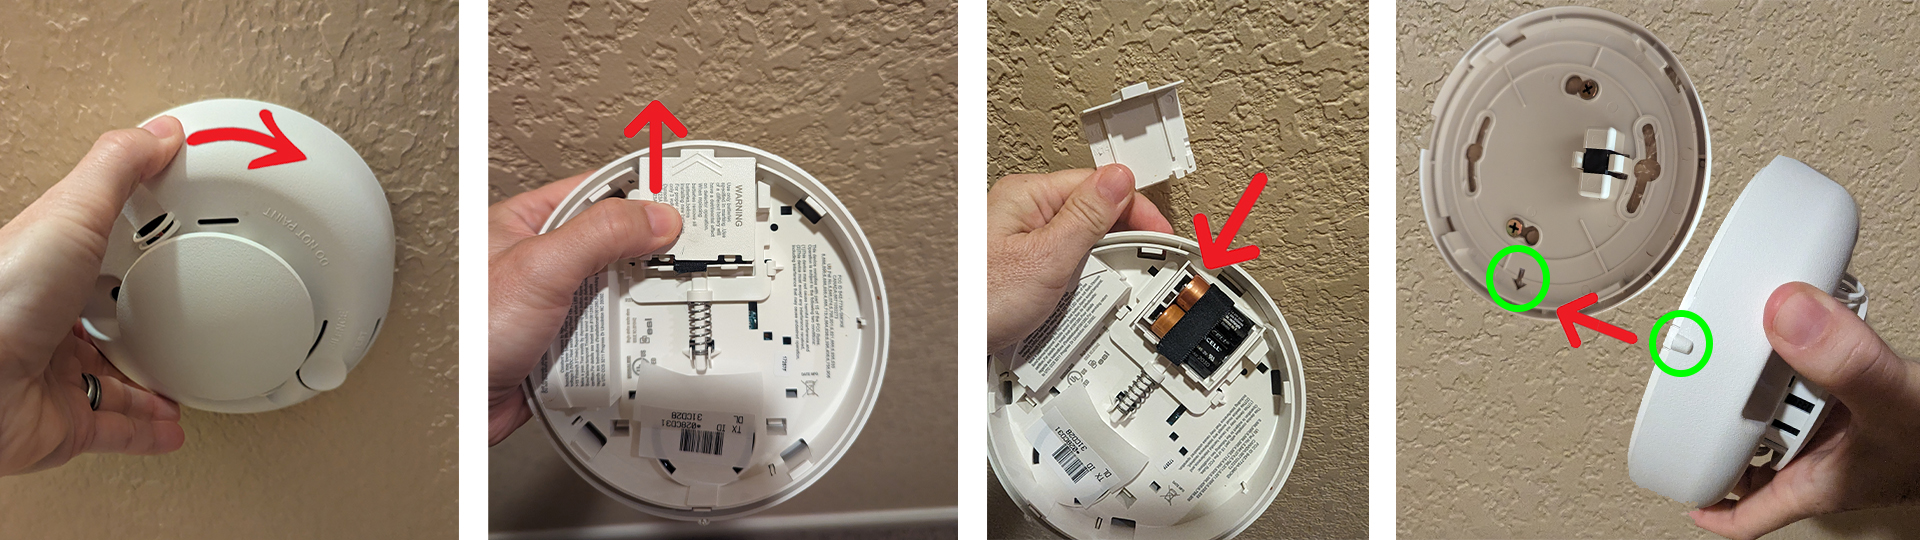 The process of replacing batteries in monitored smoke detectors